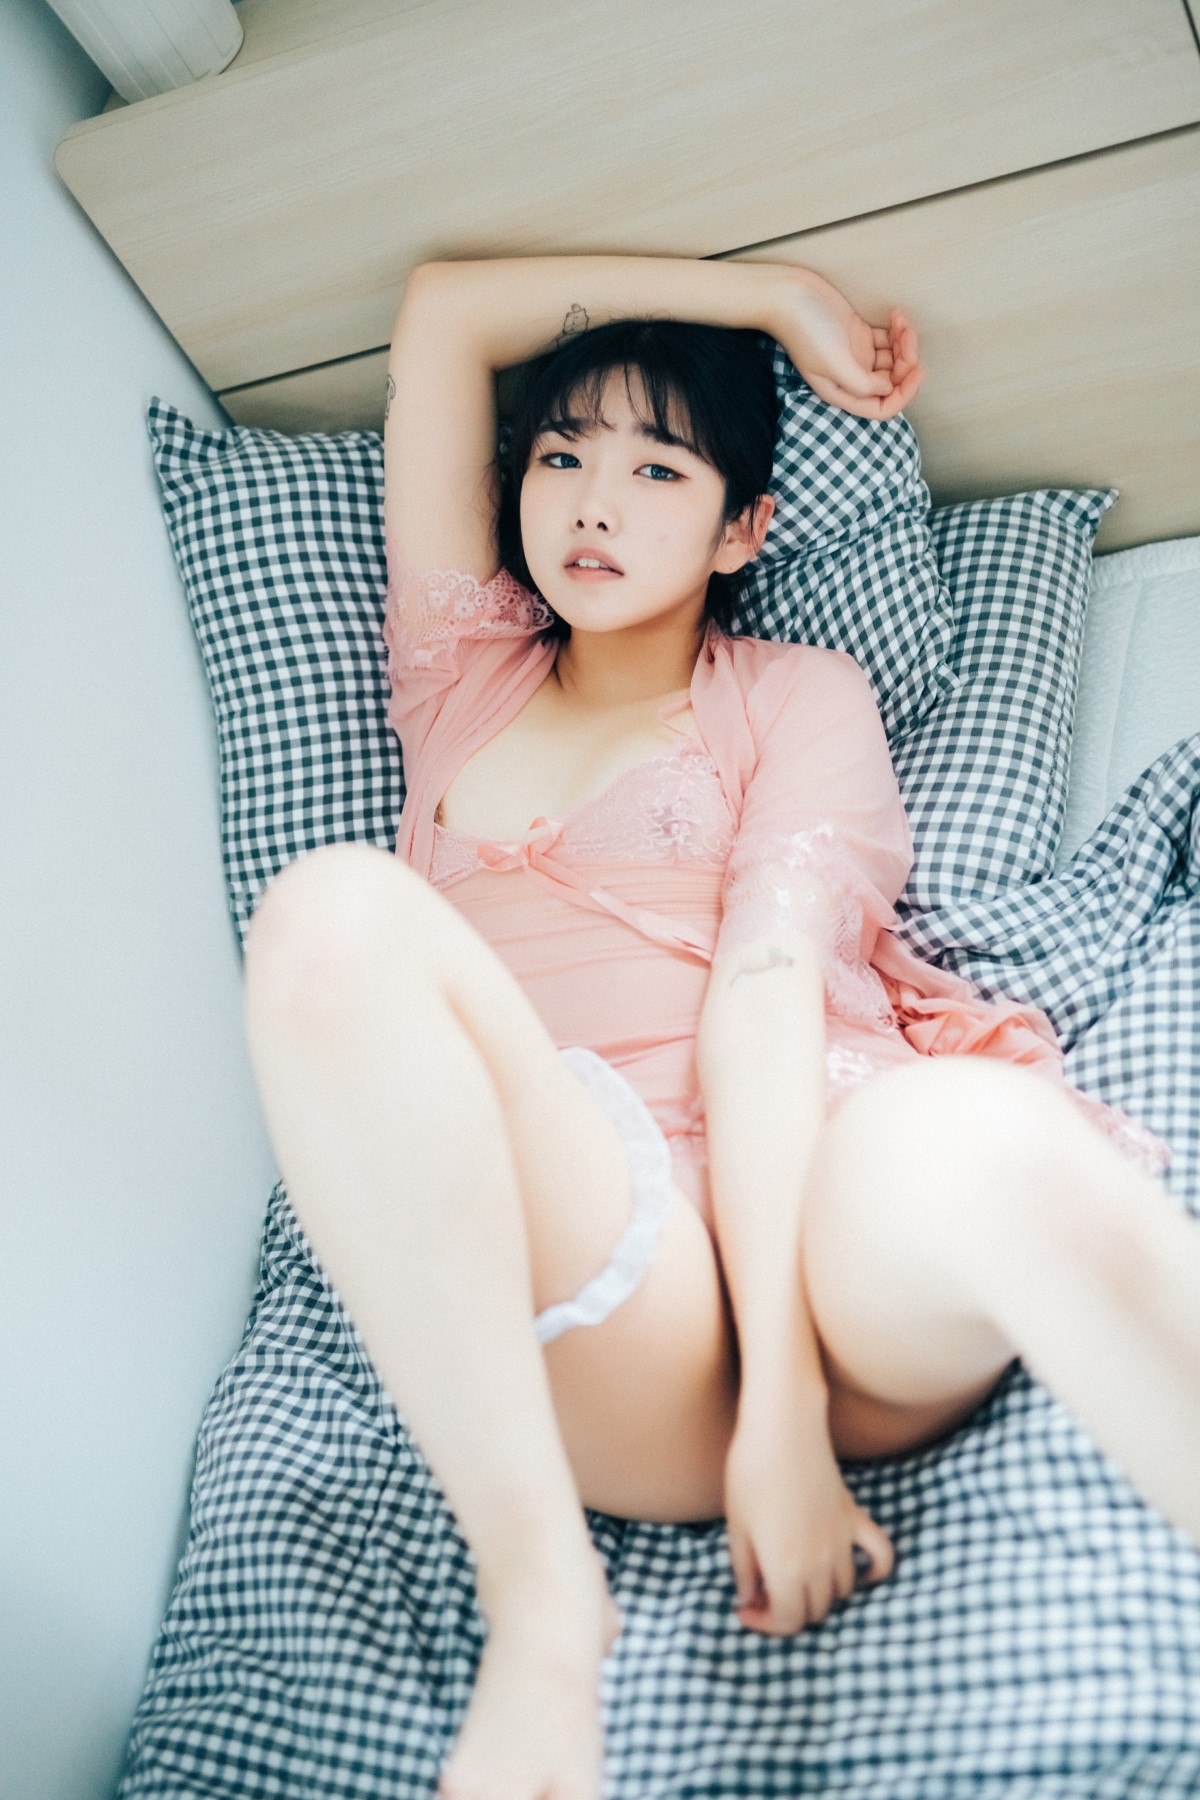 Loozy SonSon 손손 Date At Home S Ver 0064 1682891548.jpg